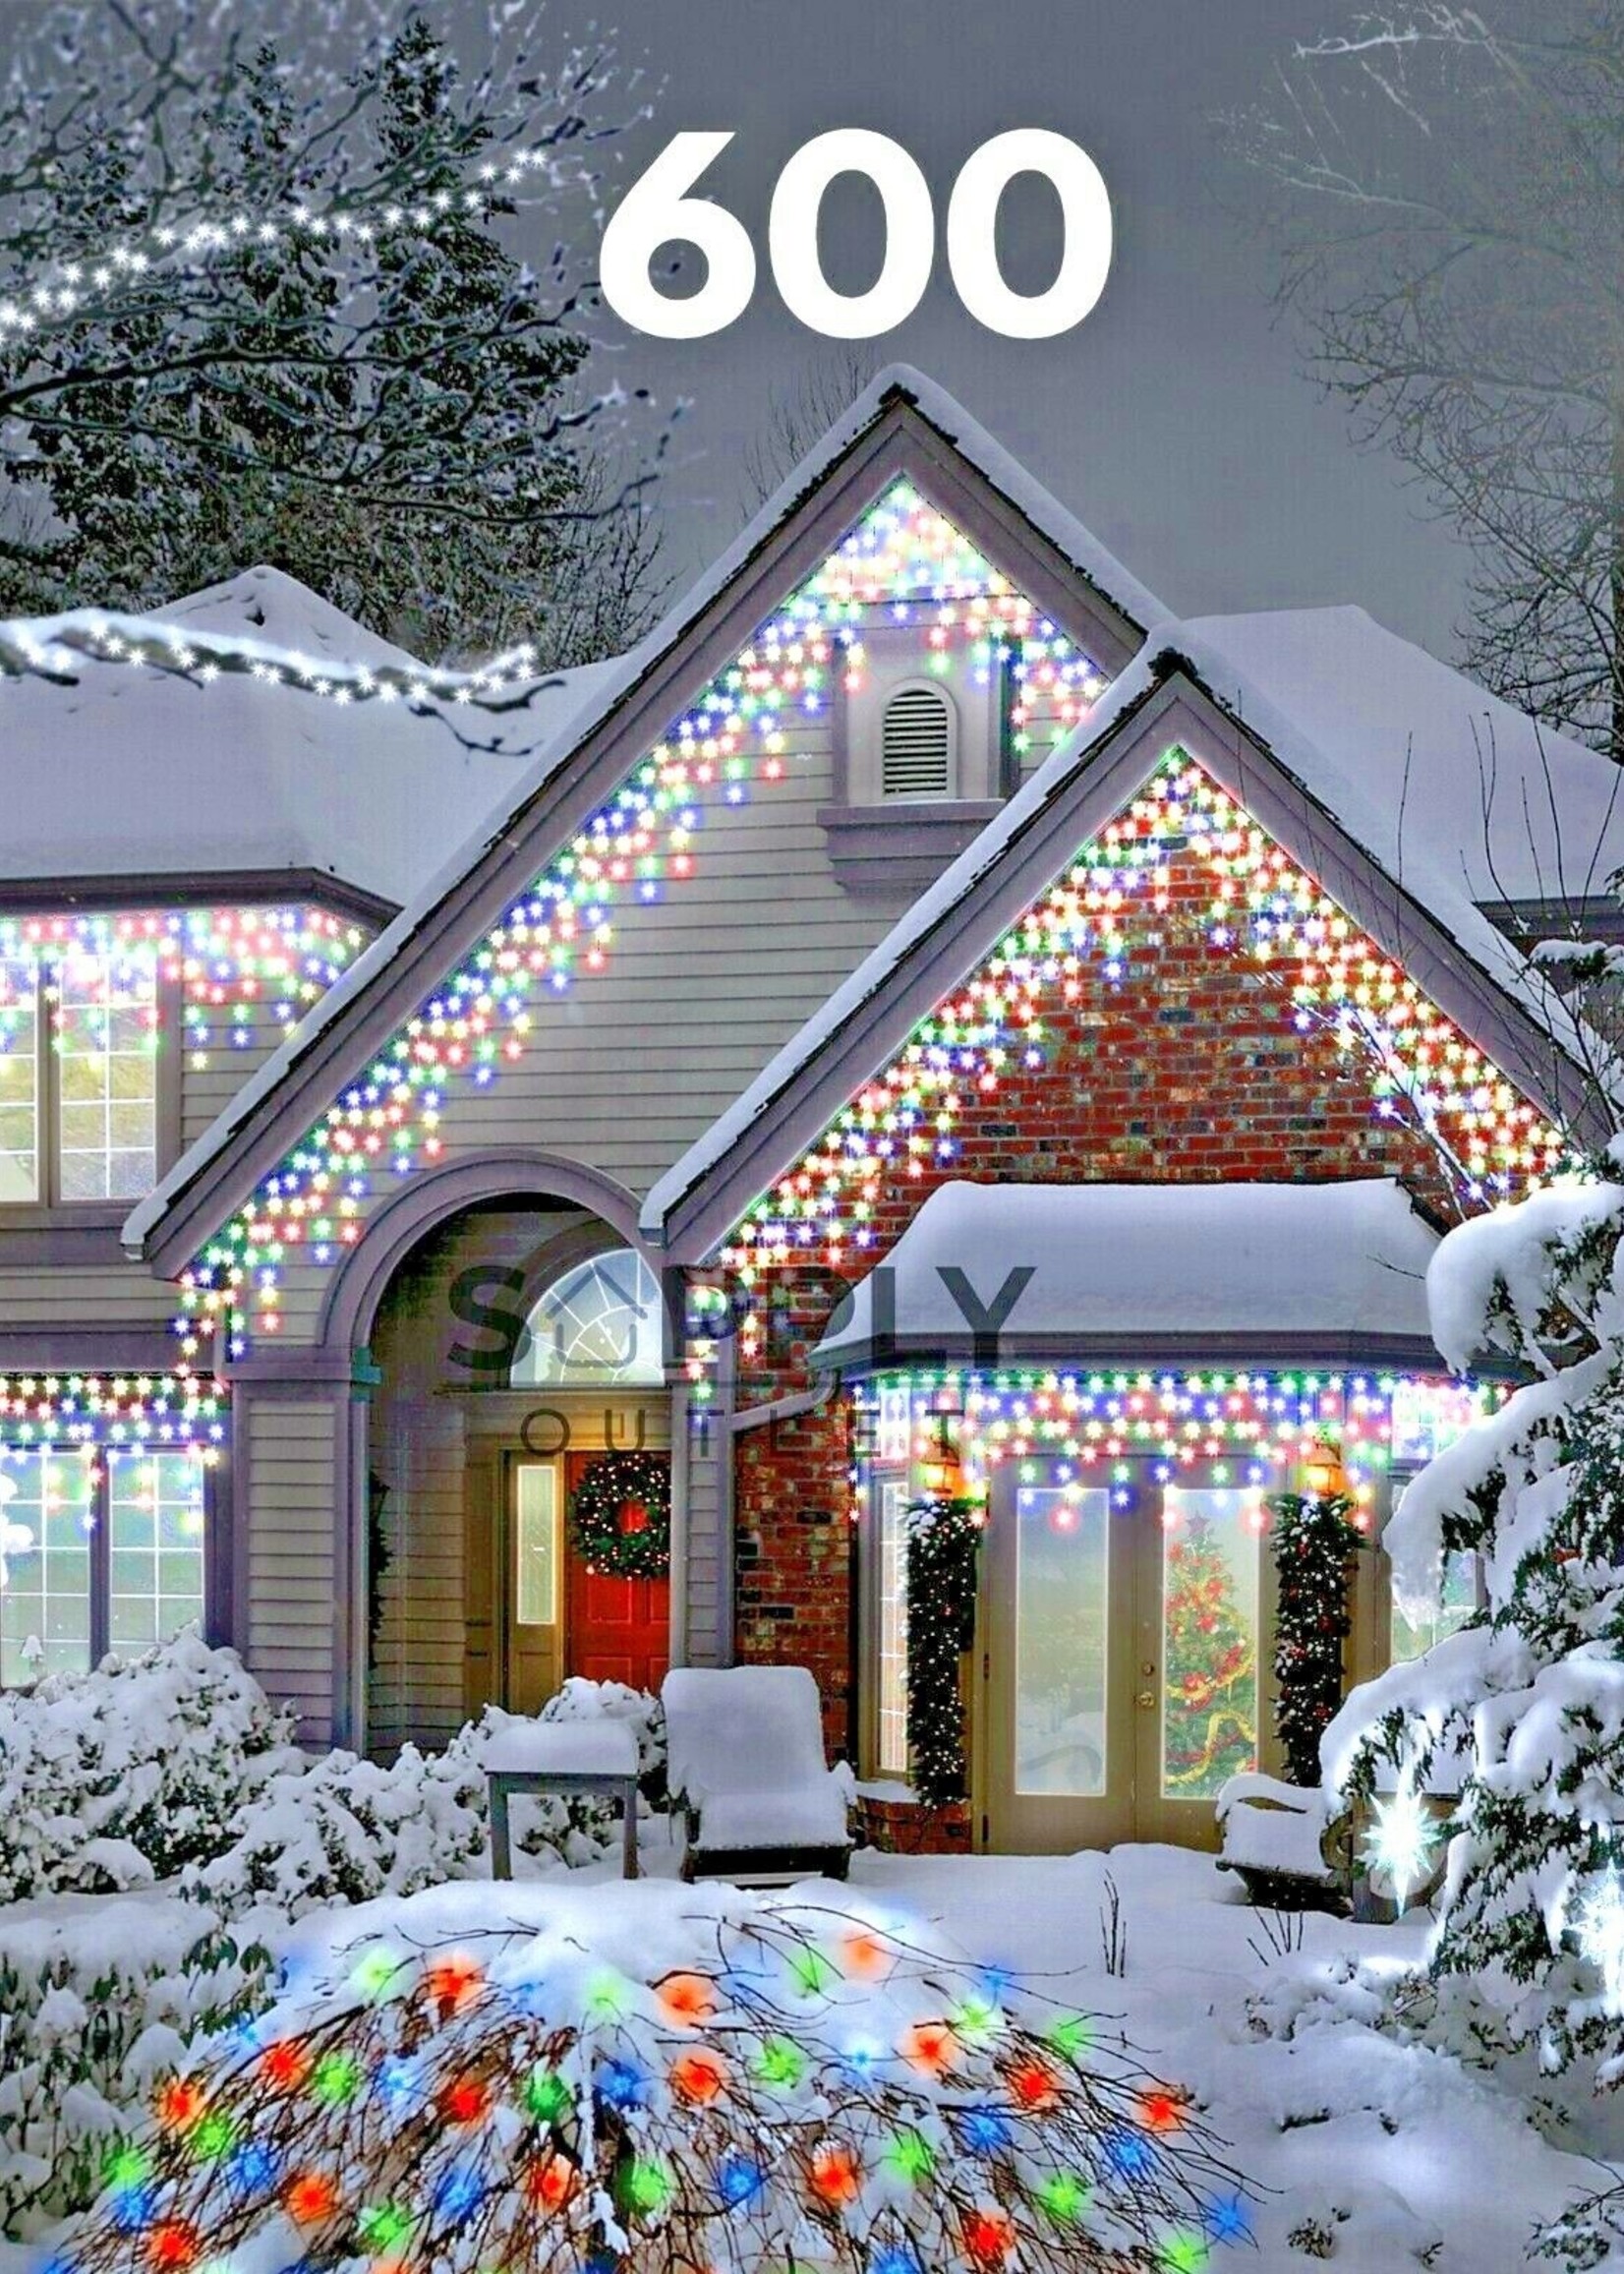 Snowtime Icicle LED Lights With Timer Indoor/Outdoor 600 Multi Colour